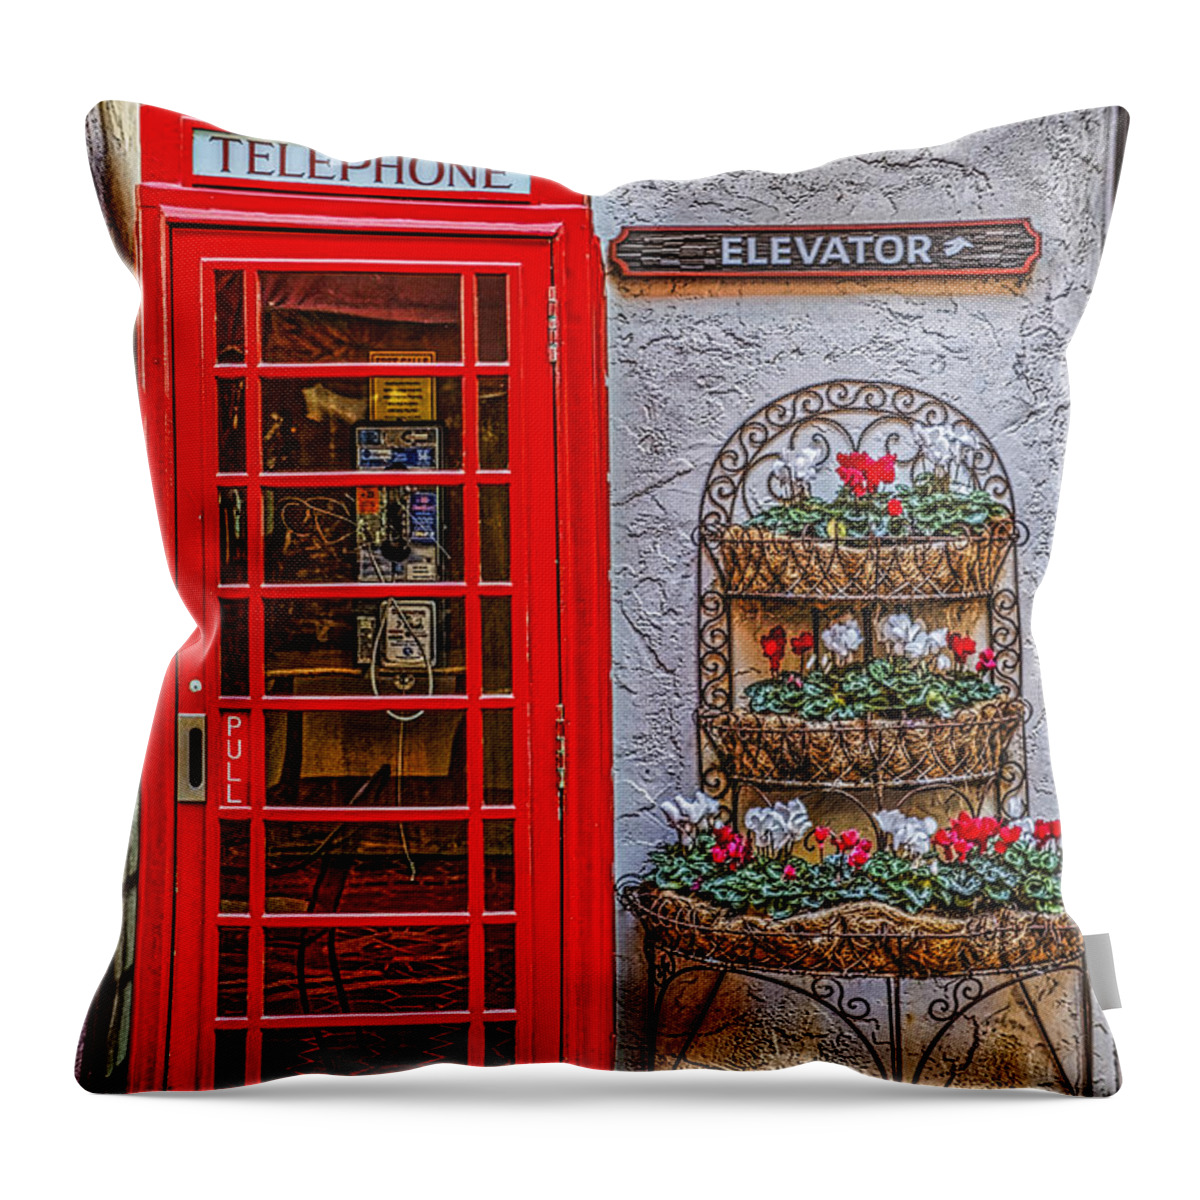 Payphone Throw Pillow featuring the photograph Payphone by Mitch Shindelbower